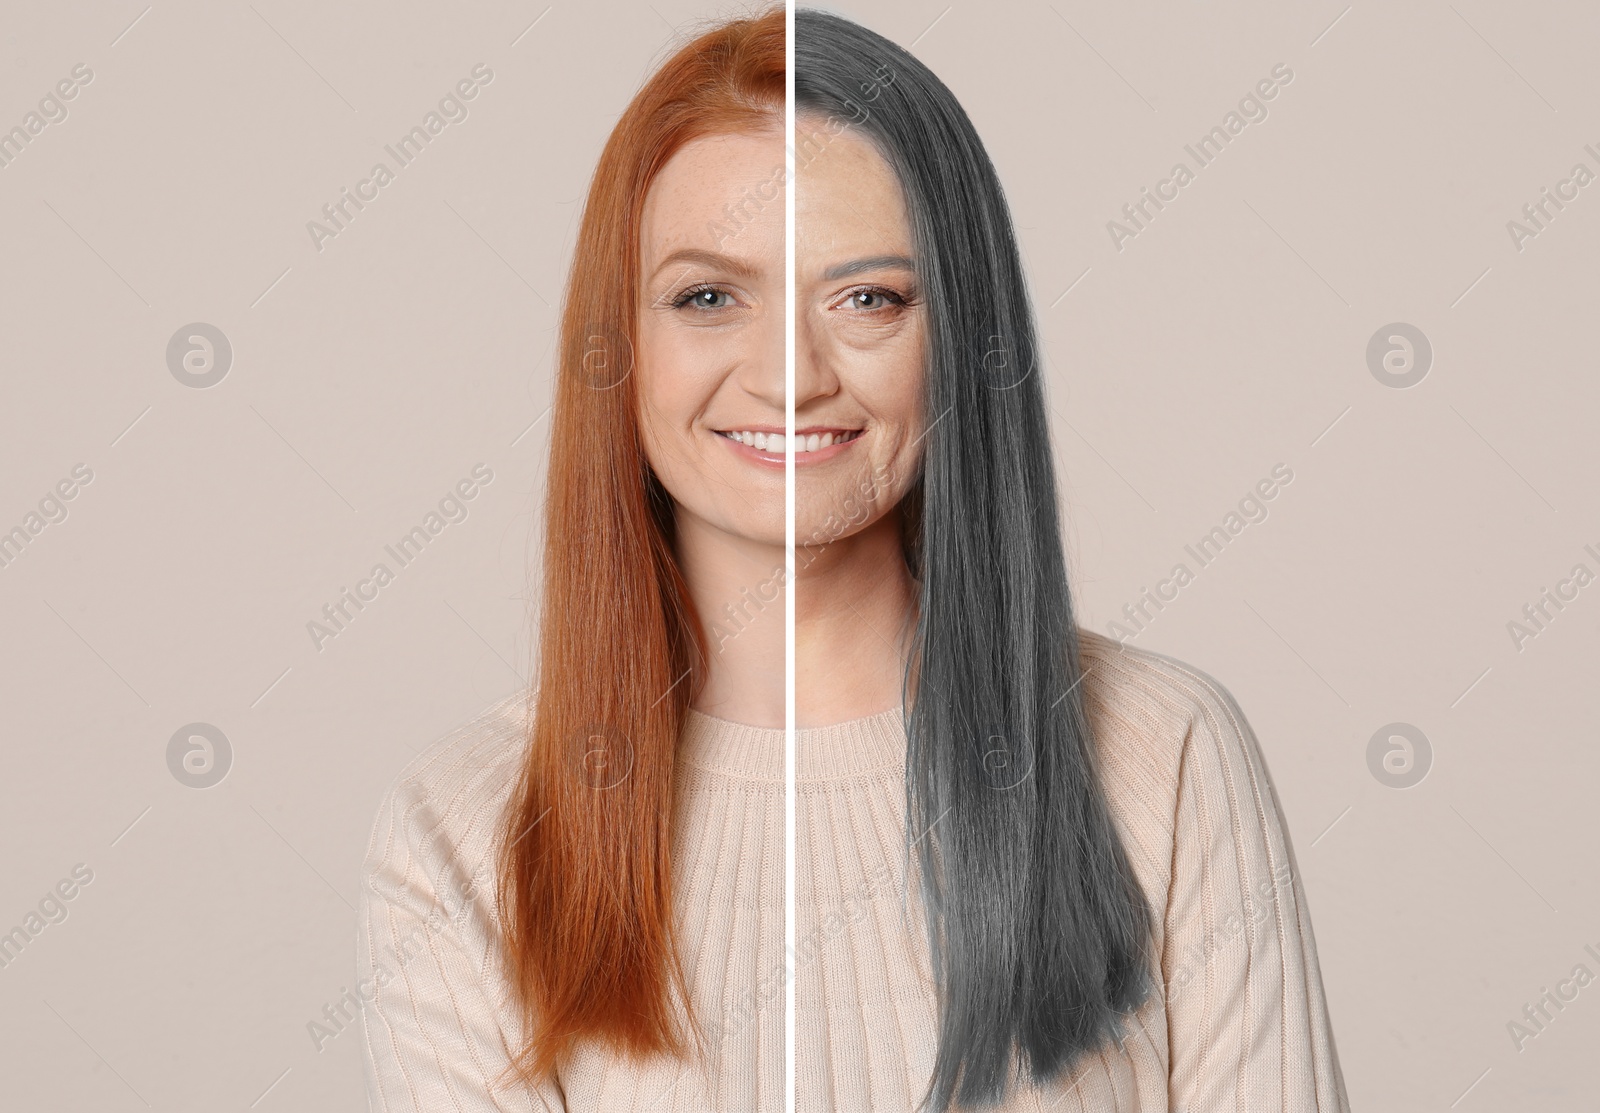 Image of Changes in appearance during aging. Portrait of woman divided in half to show her in younger and older ages. Collage design on beige background